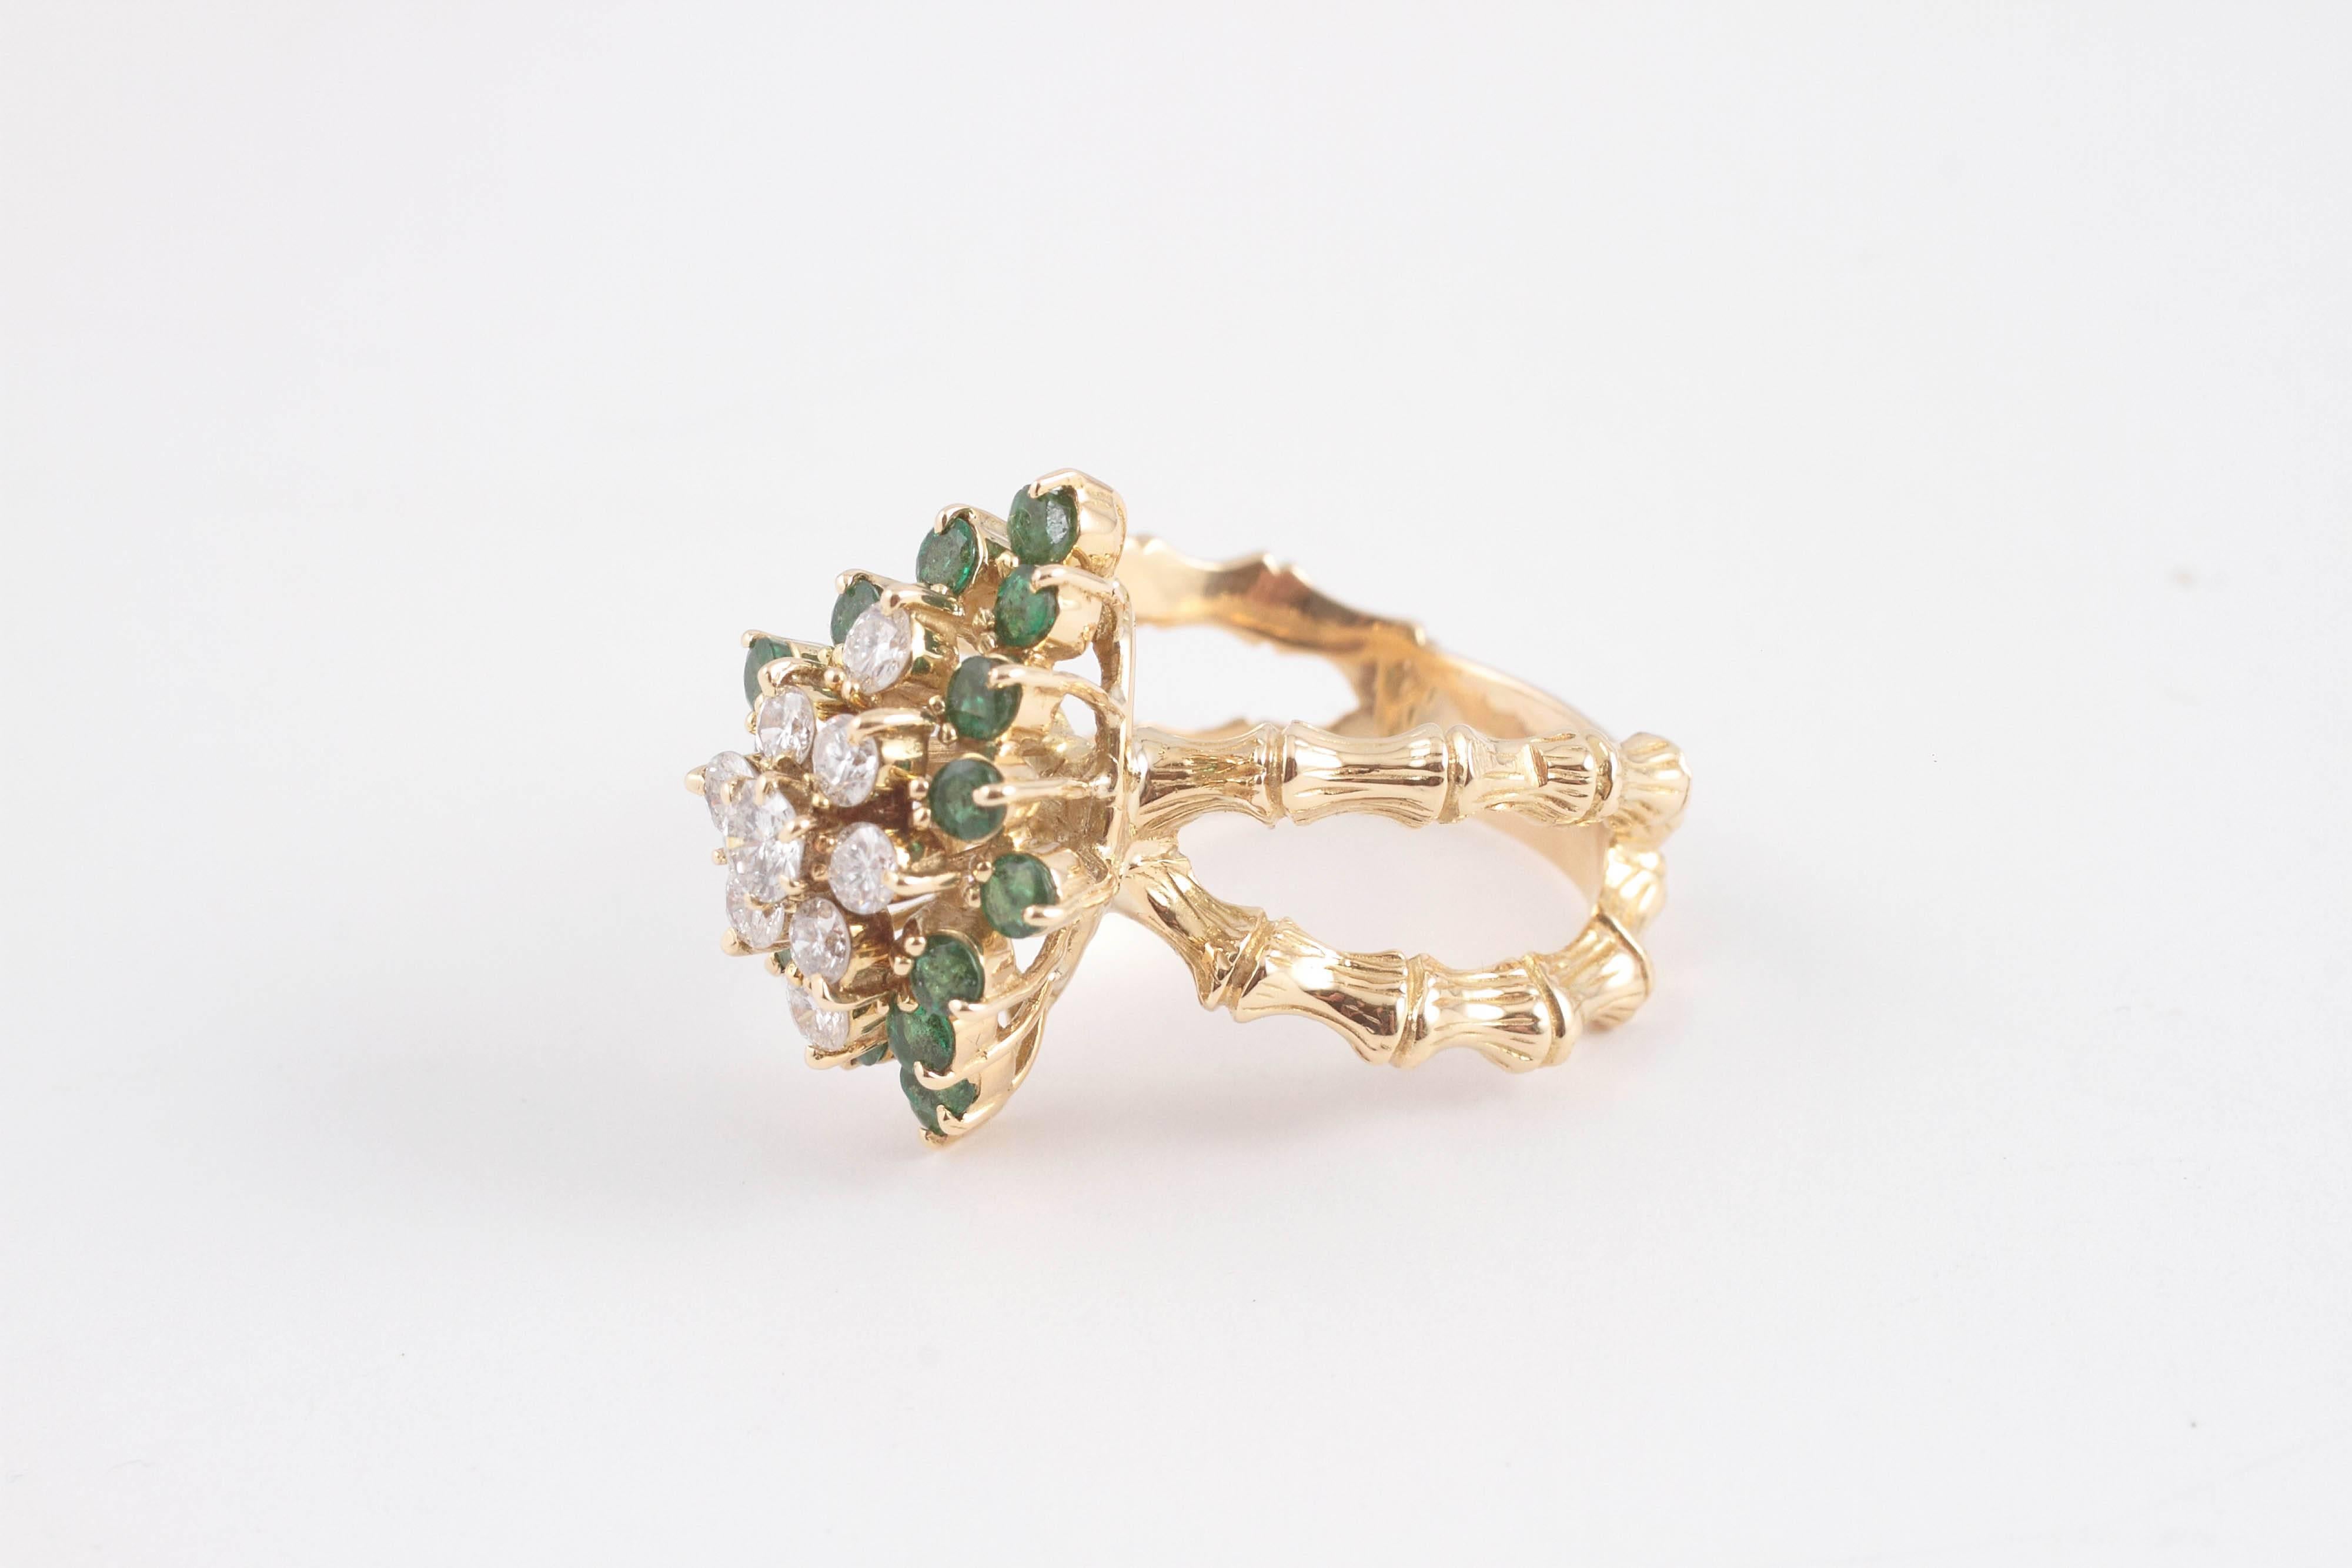 18 karat yellow gold bamboo style double shank set with a marquise shape cluster of diamonds surrounded by emeralds.  A fun and fanciful feel to the whole ring.  Size 9 1/2